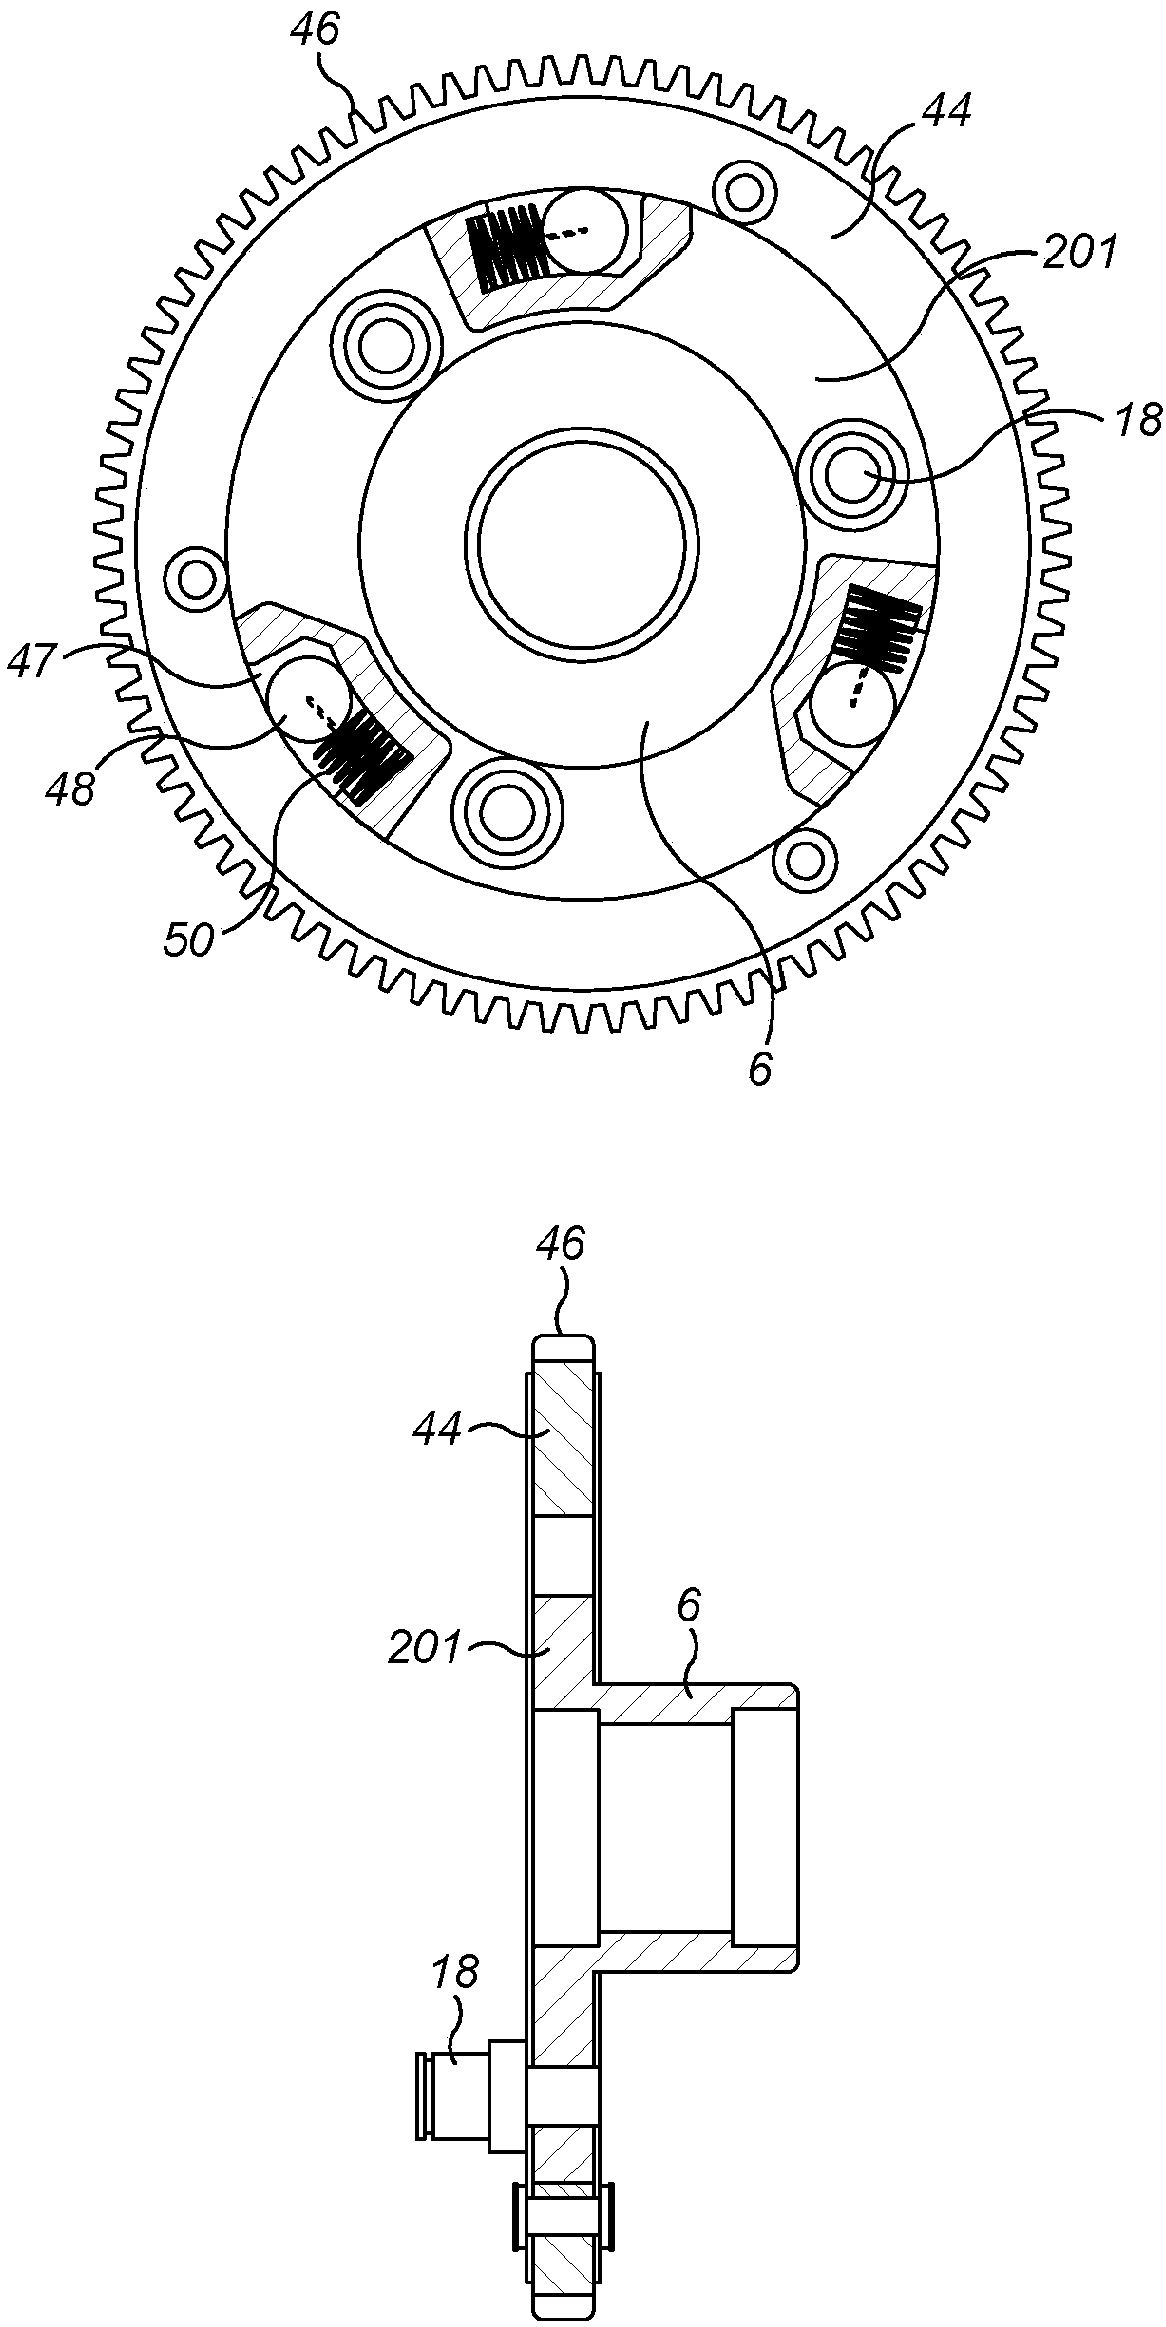 A method of operating a pedal cycle having an electro-mechanical drive arrangement